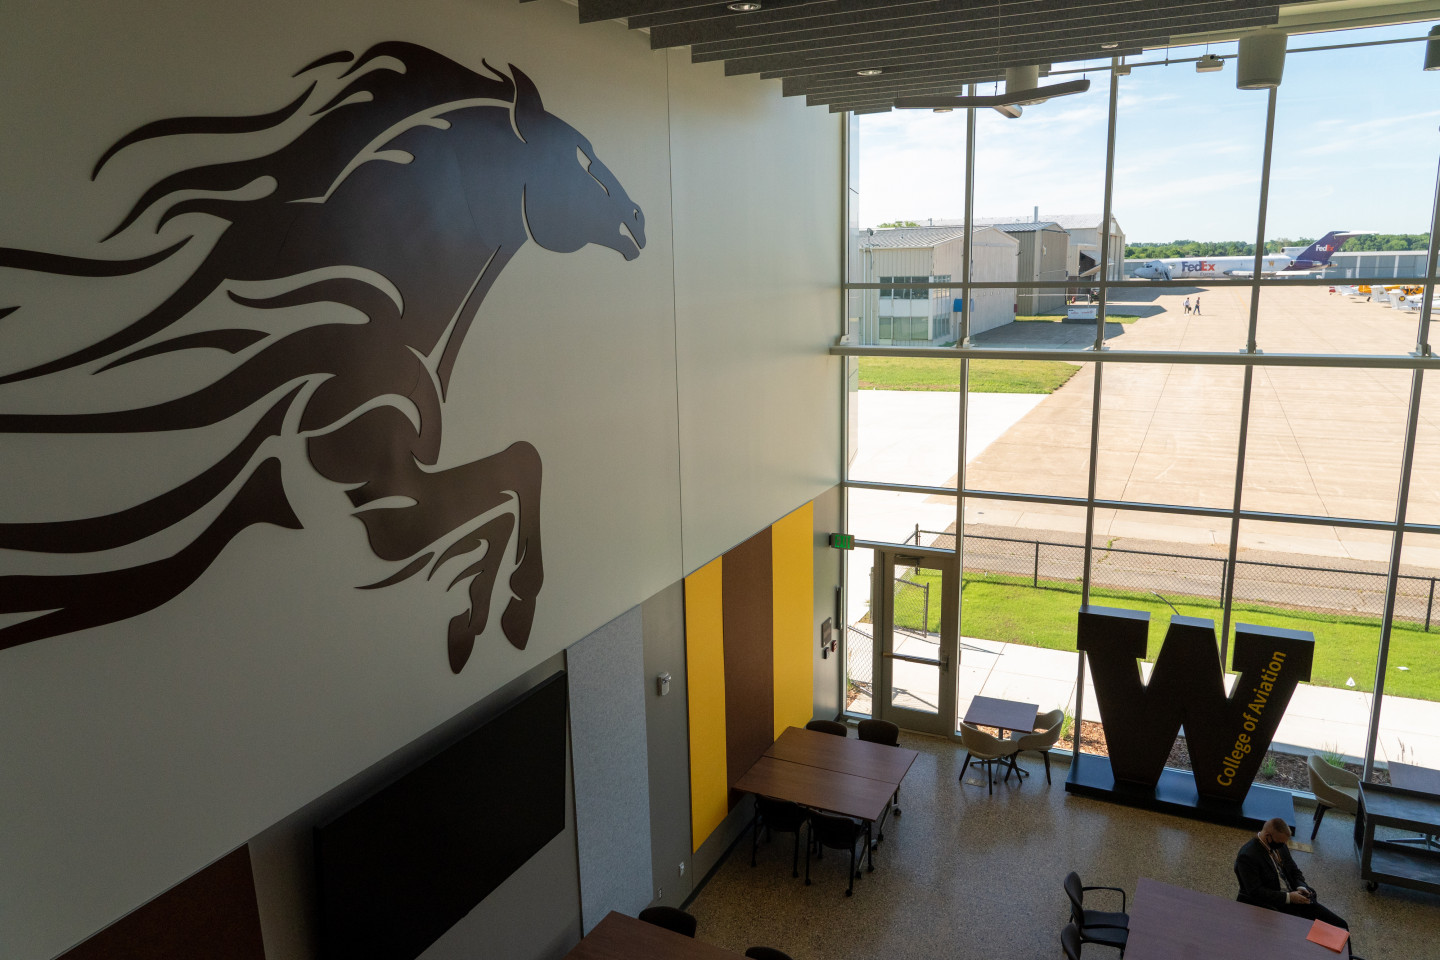 The lobby of the Aviation Education Center featuring a bronco on the wall and a W in the window.